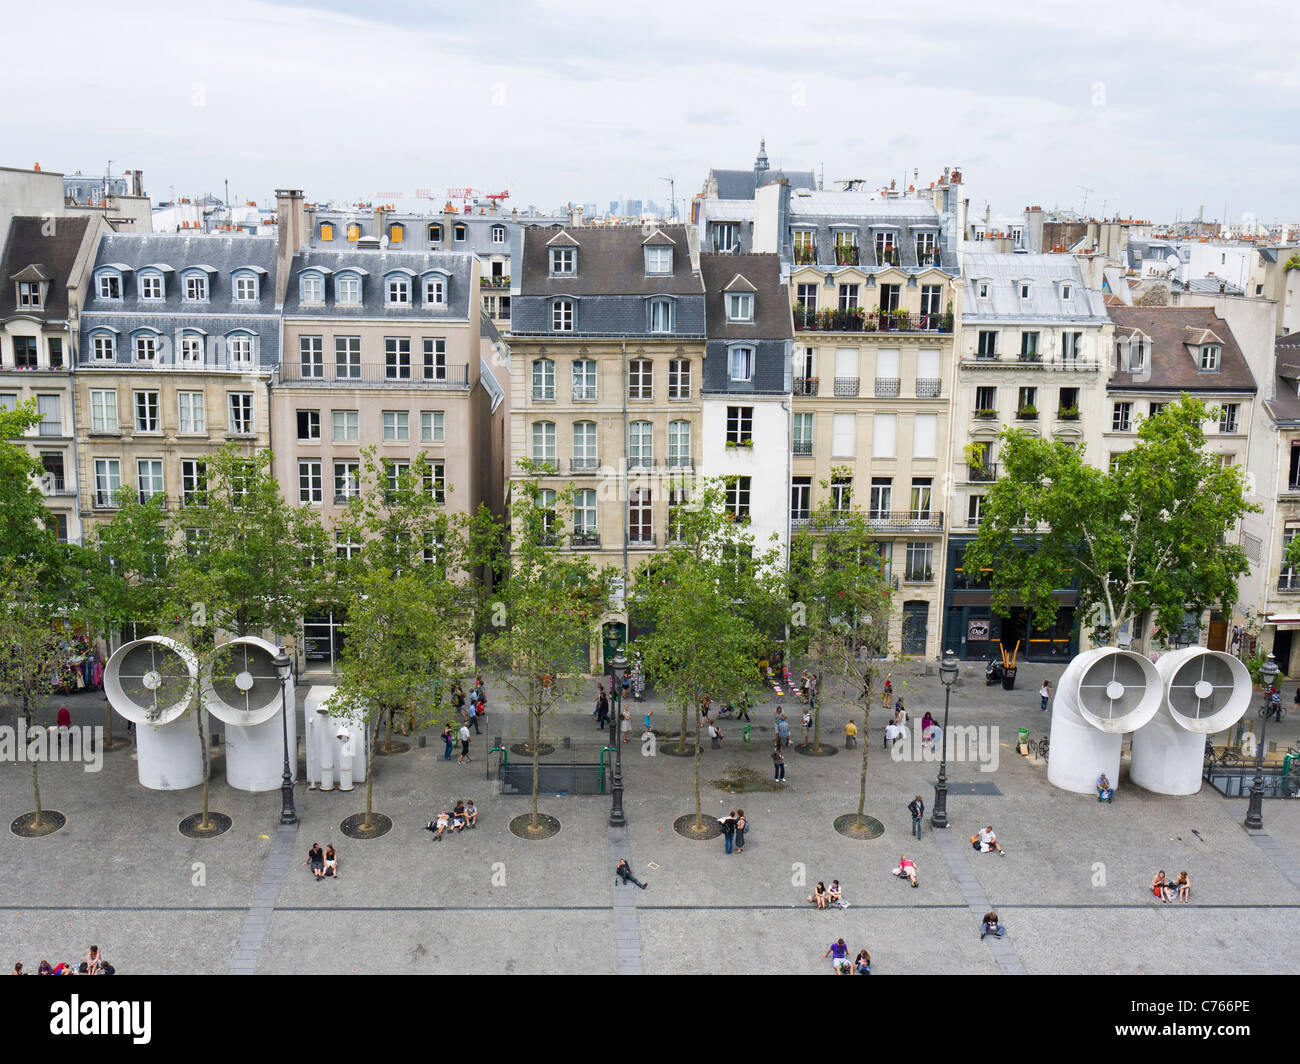 View of shops and narrow houses from Georges Pompidou Centre Paris France EU Stock Photo